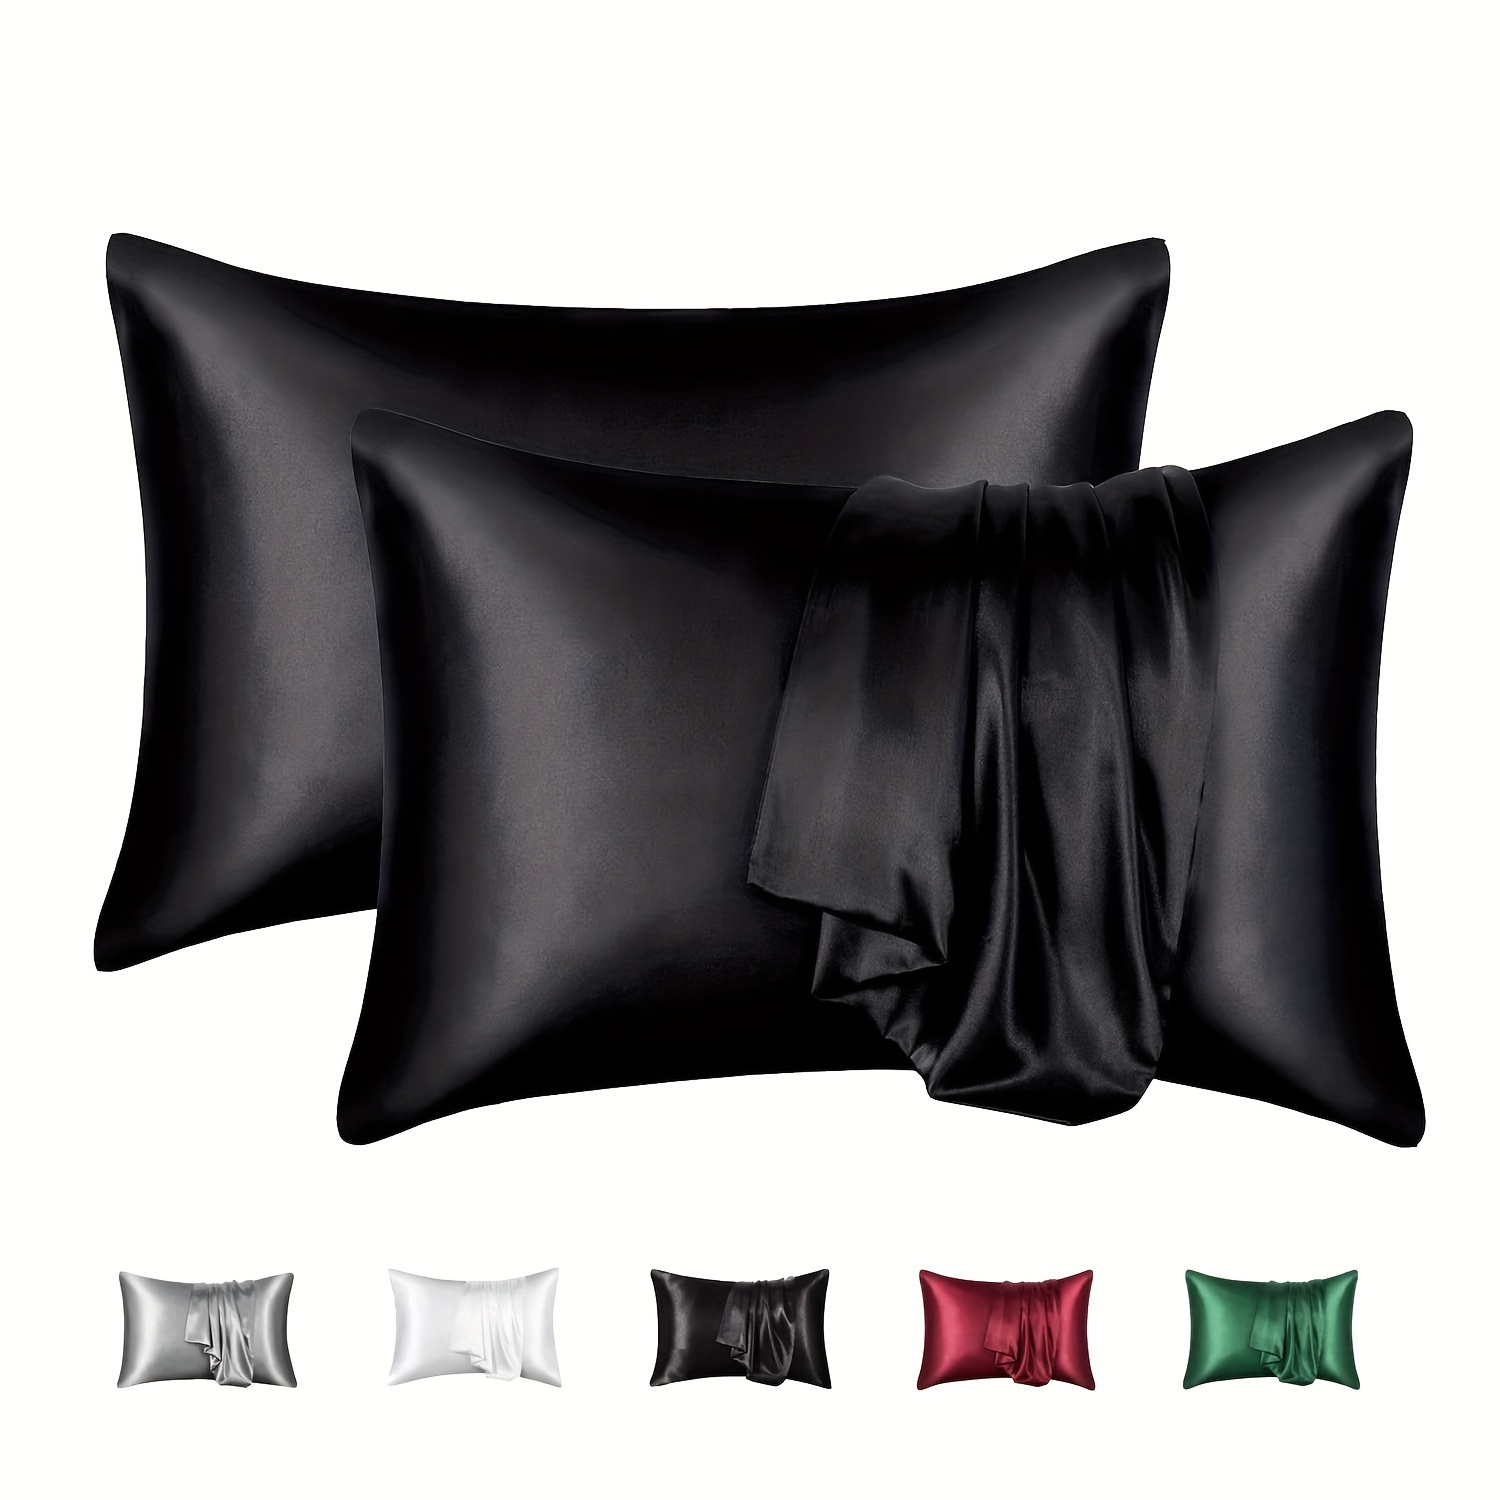 

2pcs Soft Satin Pillowcase - Envelope Pillowcase For Bed, Sofa, And Couch - No Pillow Insert Needed